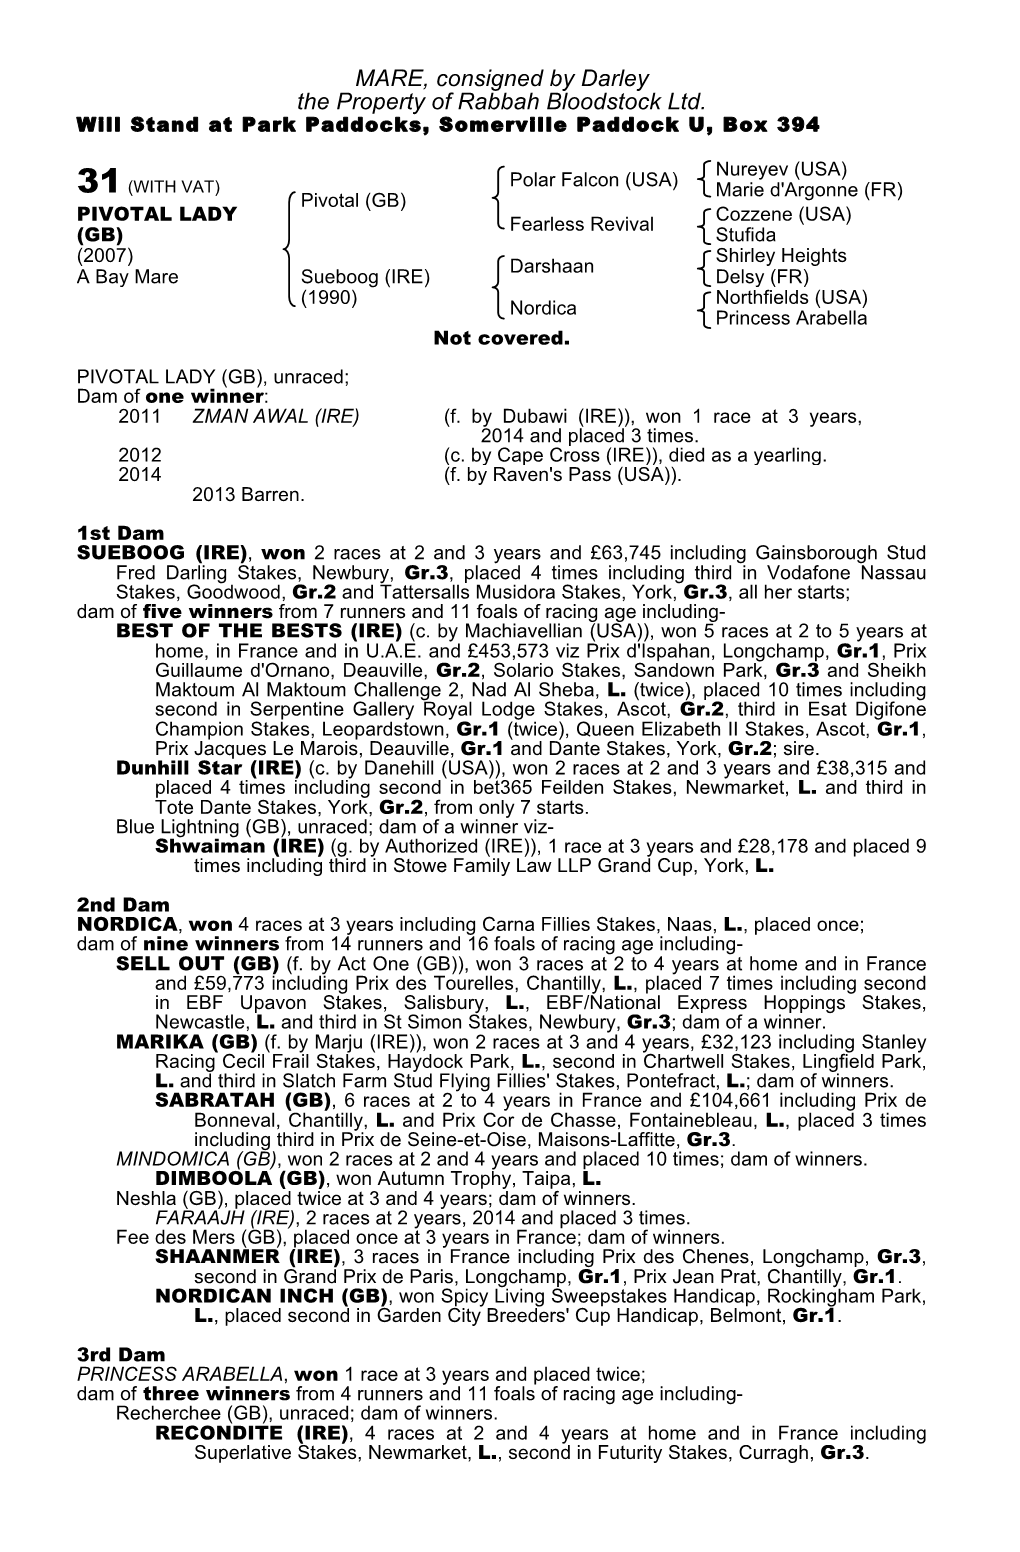 MARE, Consigned by Darley the Property of Rabbah Bloodstock Ltd. Will Stand at Park Paddocks, Somerville Paddock U, Box 394